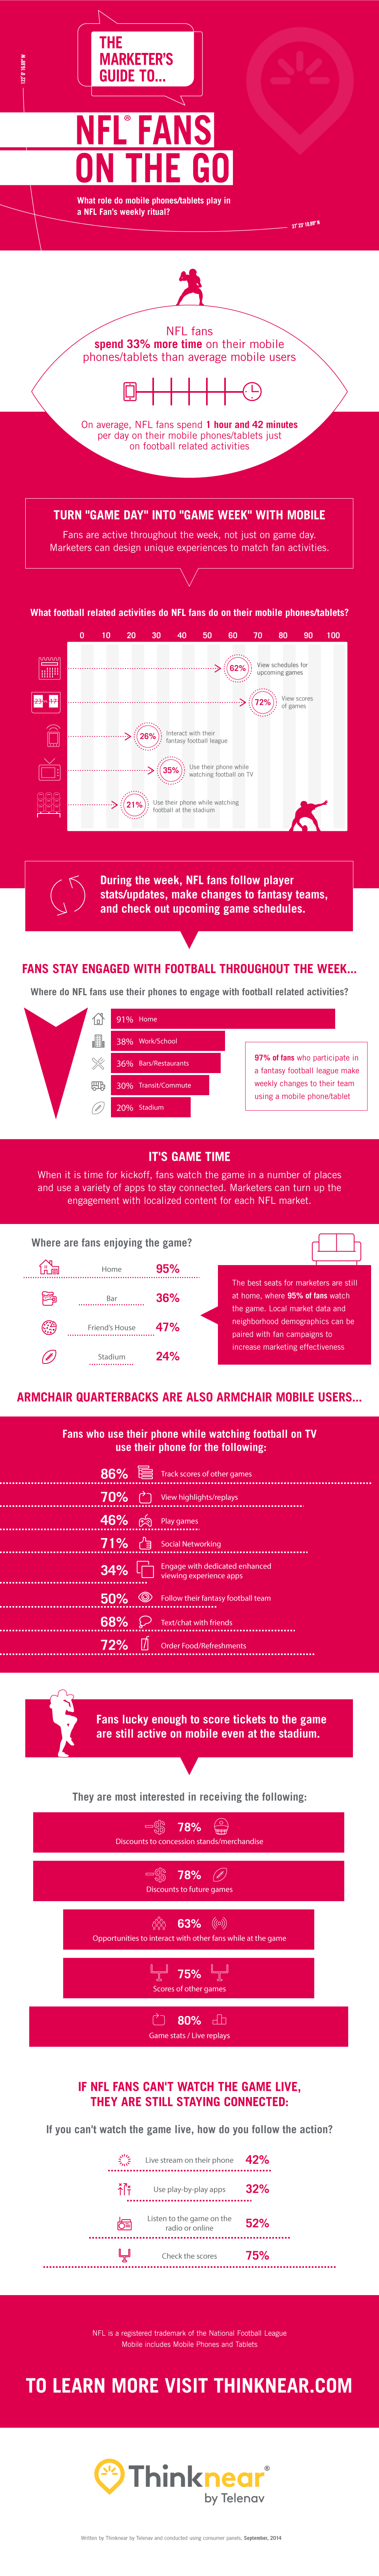 Mobile-Marketers-Guide-to-NFL-Fans